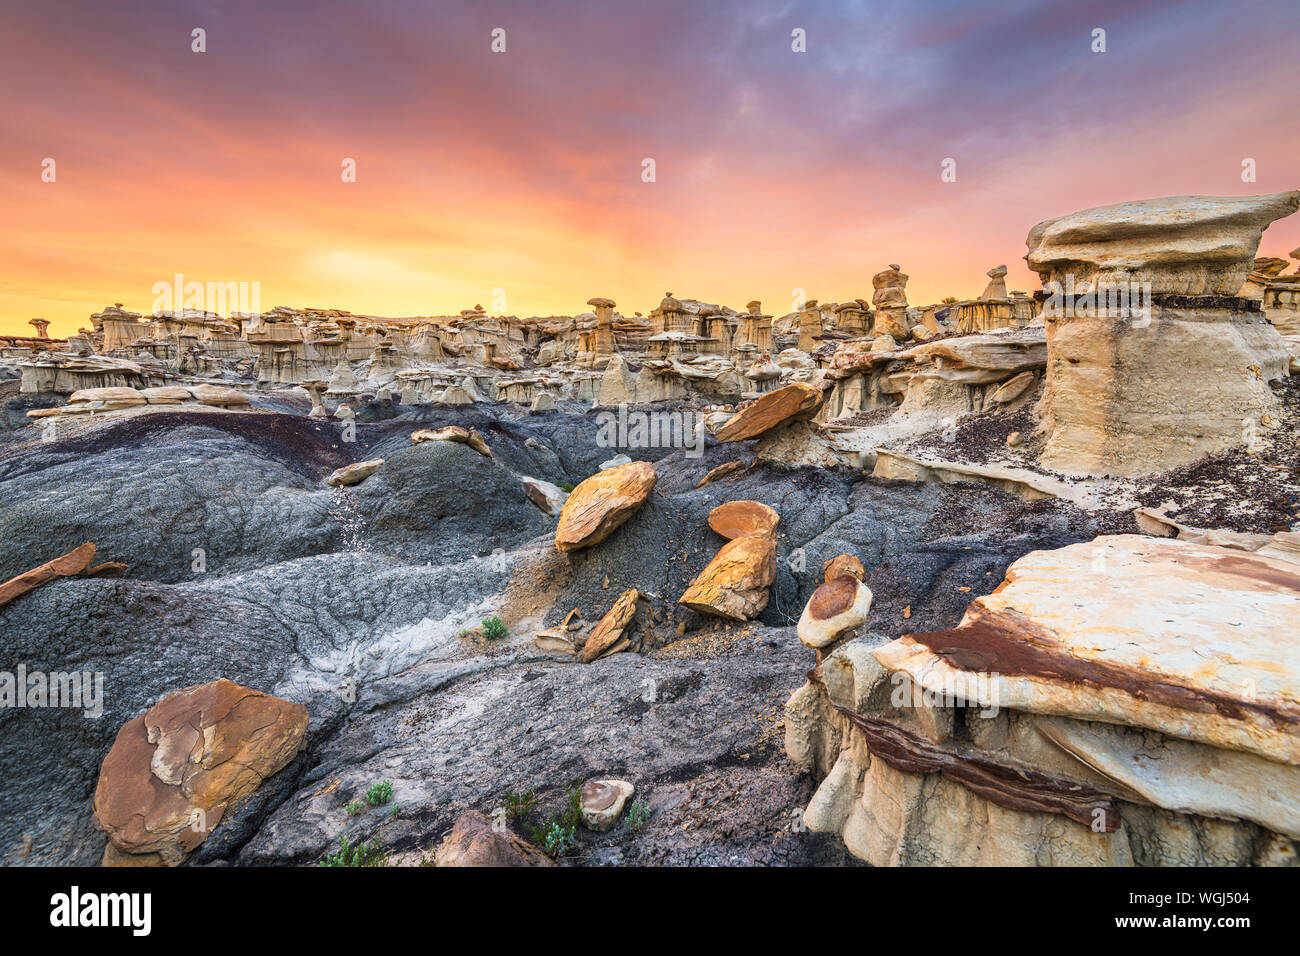 Bisti/De-Na-Zin Wilderness, New Mexico, USA at Valley of Dreams after sunset. Stock Photo